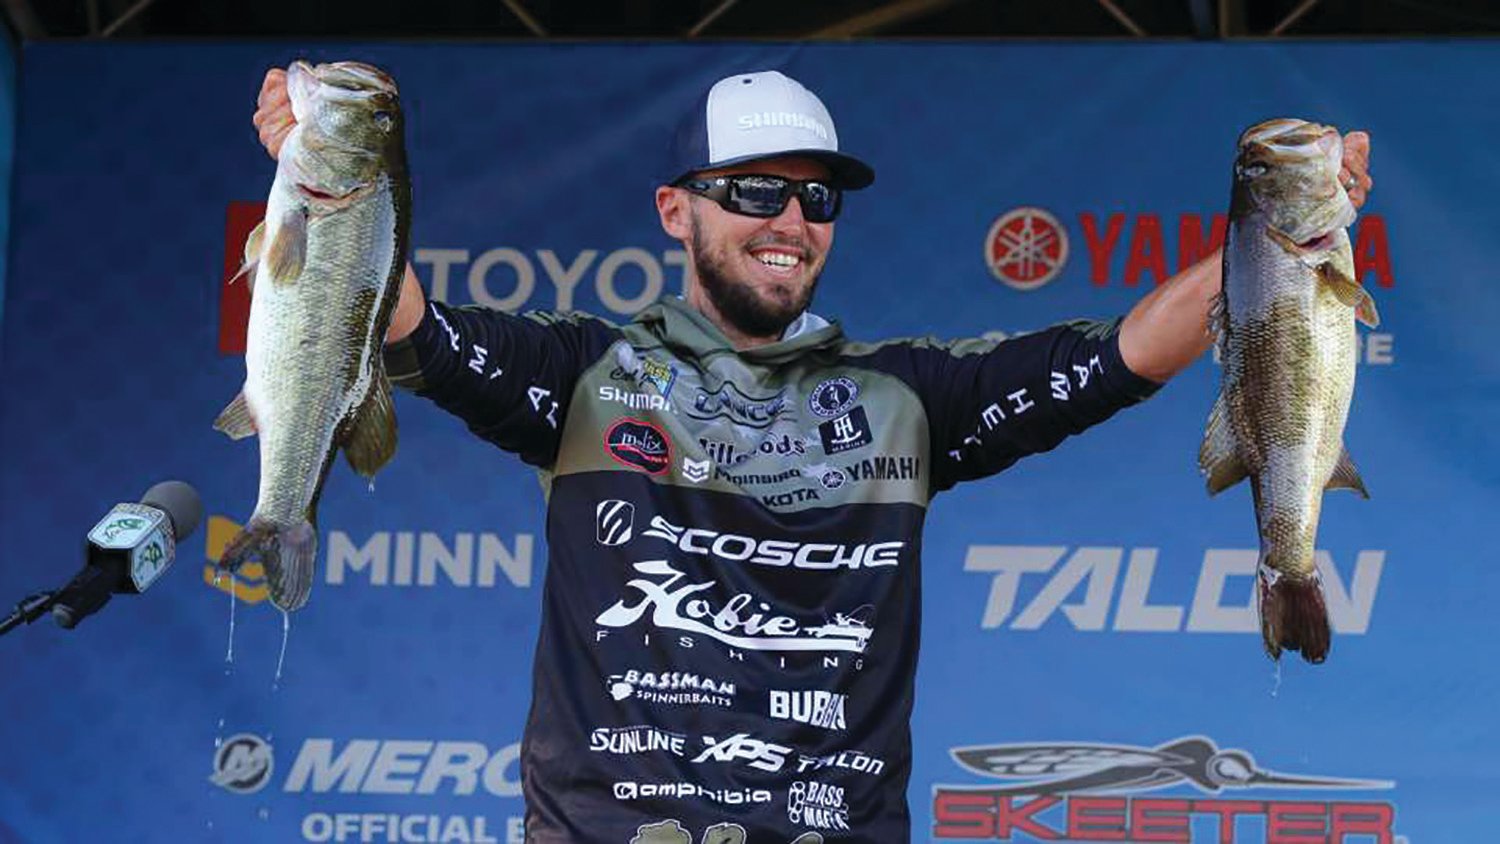 Palaniuk moves into the lead on 2nd day of Bassmaster Elite on Santee  Cooper - The Sumter Item